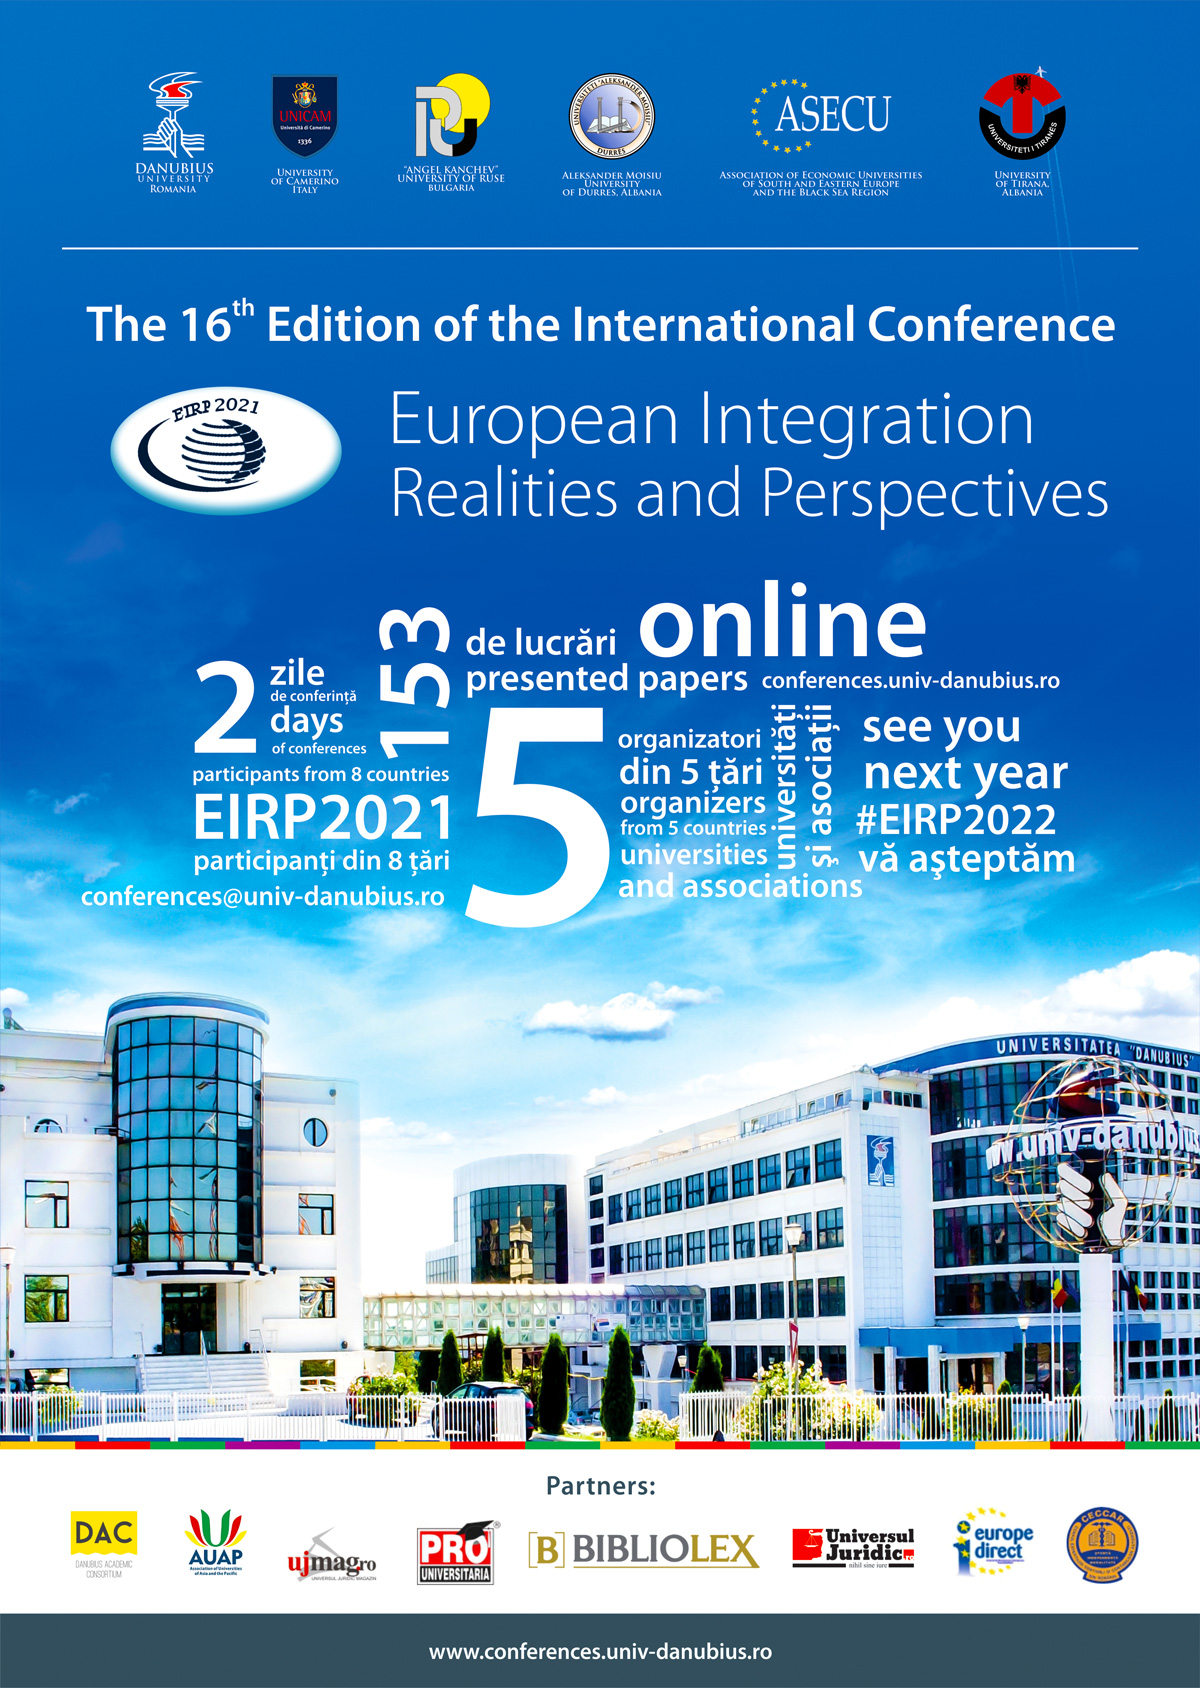 The International Scientific Conference “European Integration. Realities and Perspectives ”- EIRP